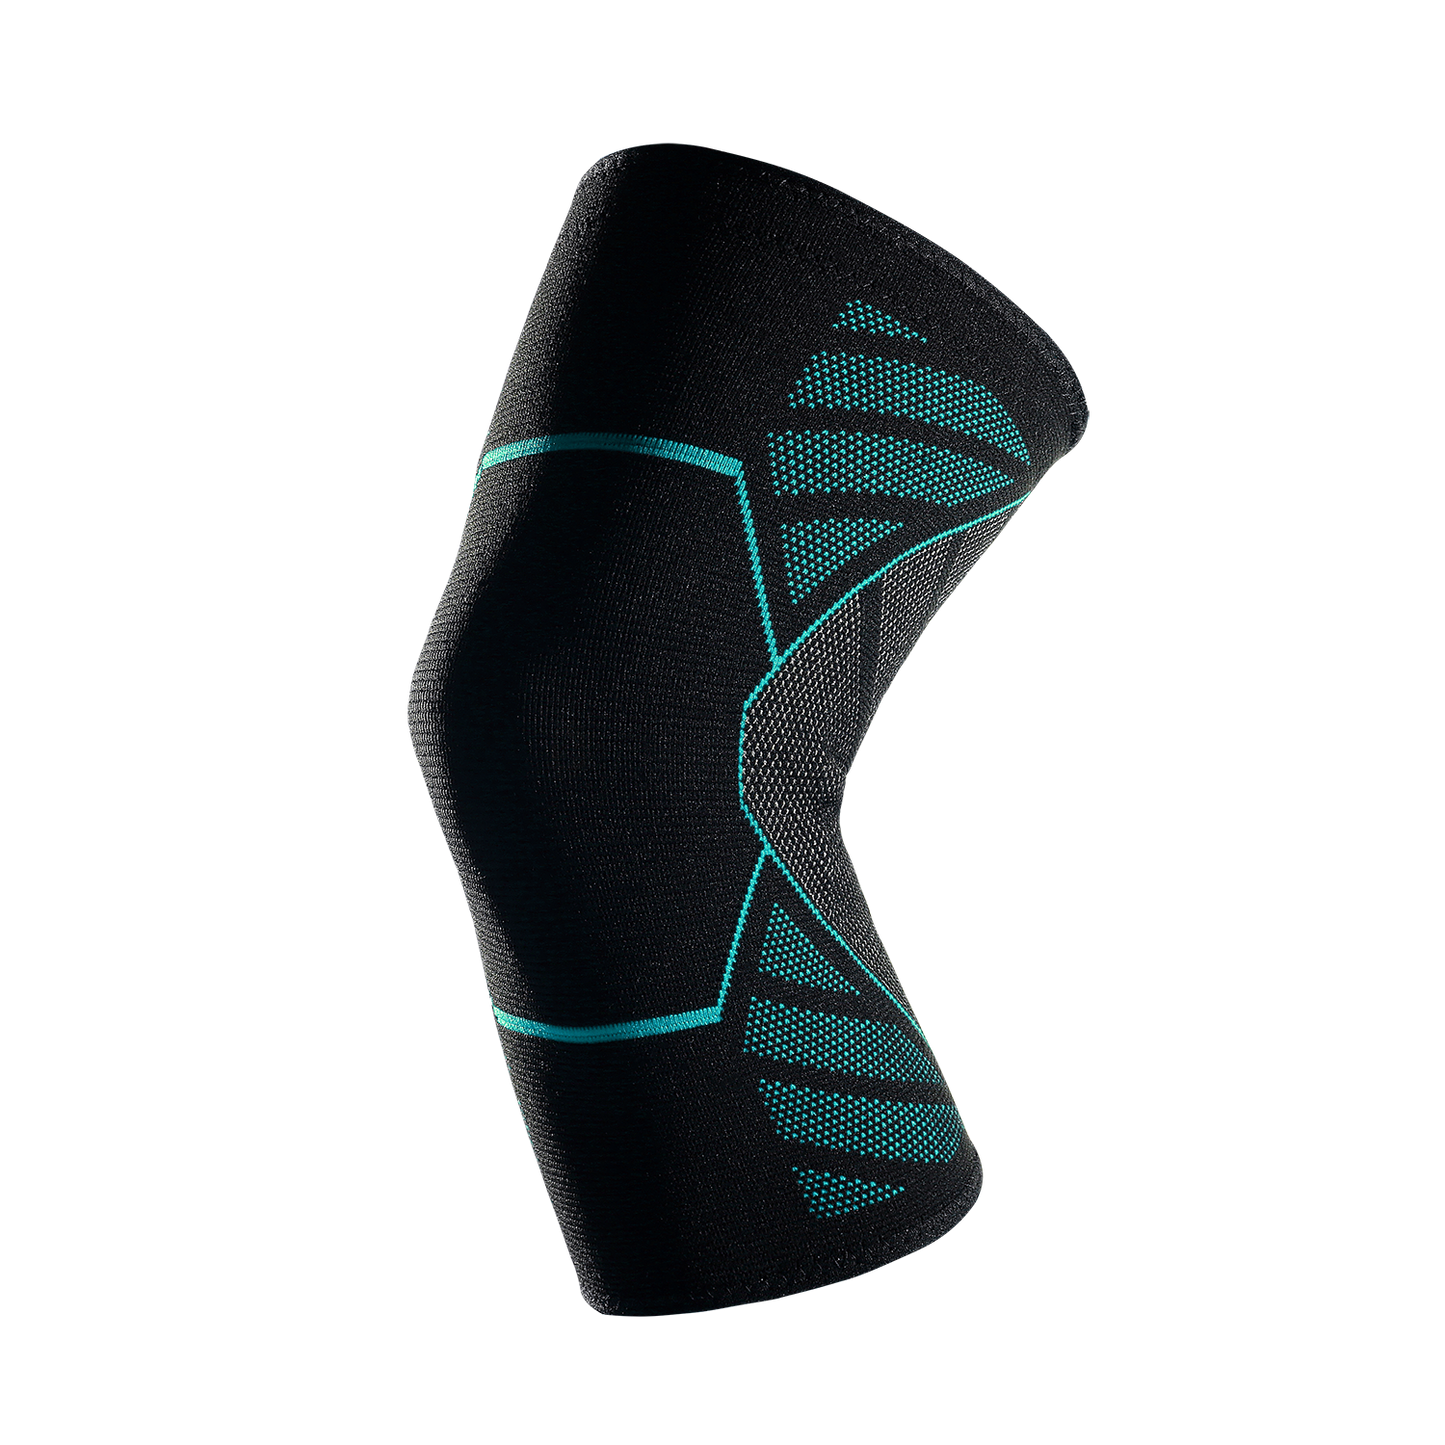 Summer Breathable Meniscus Kneepads Sports Safety Guards Kneepads Nylon Fitness Basketball Kneepads